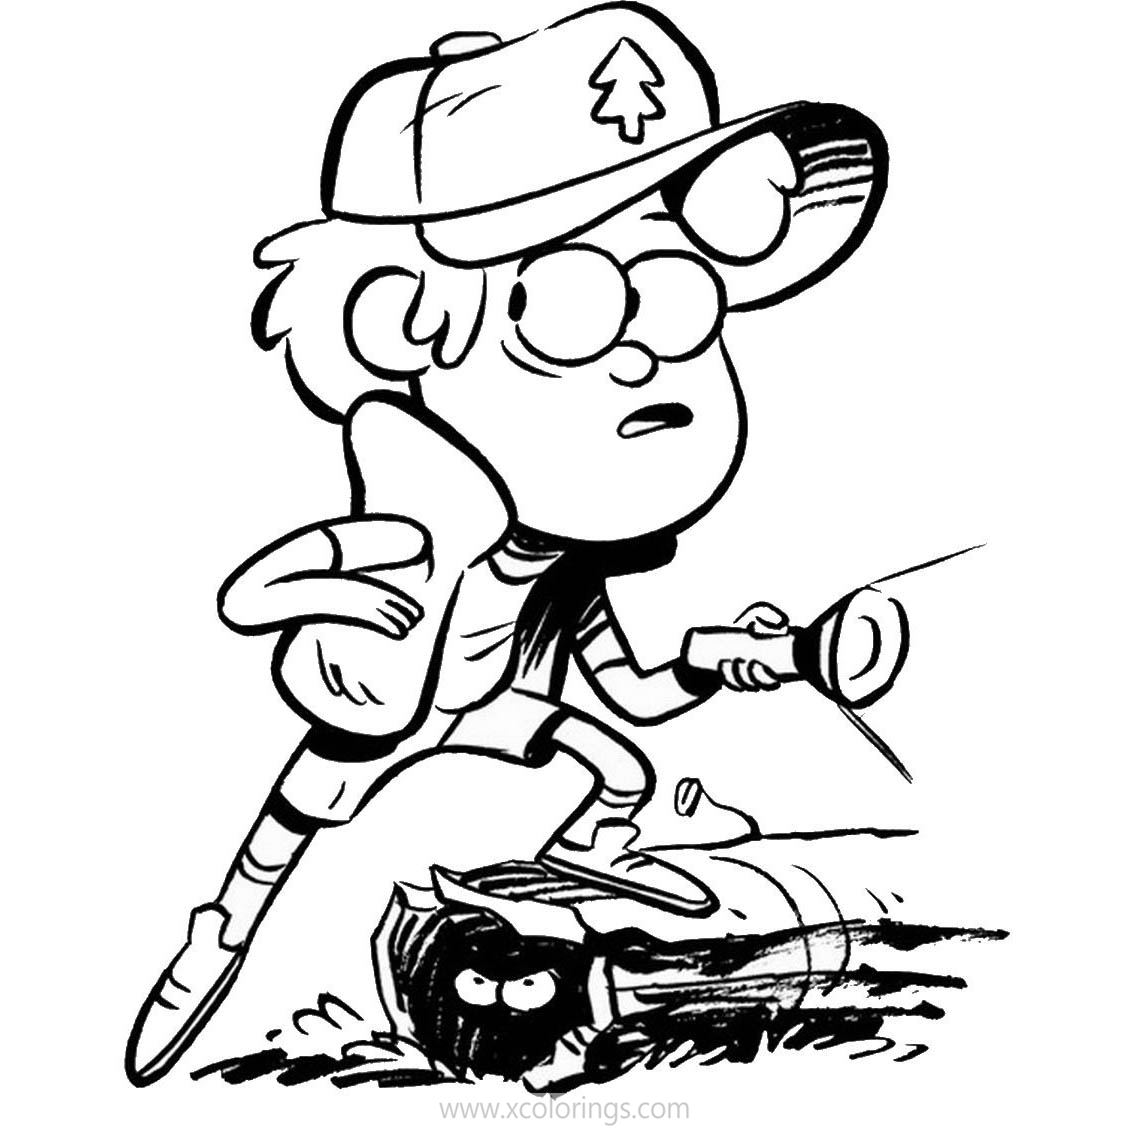 Free Gravity Falls Coloring Pages Dipper with a Flashlight printable